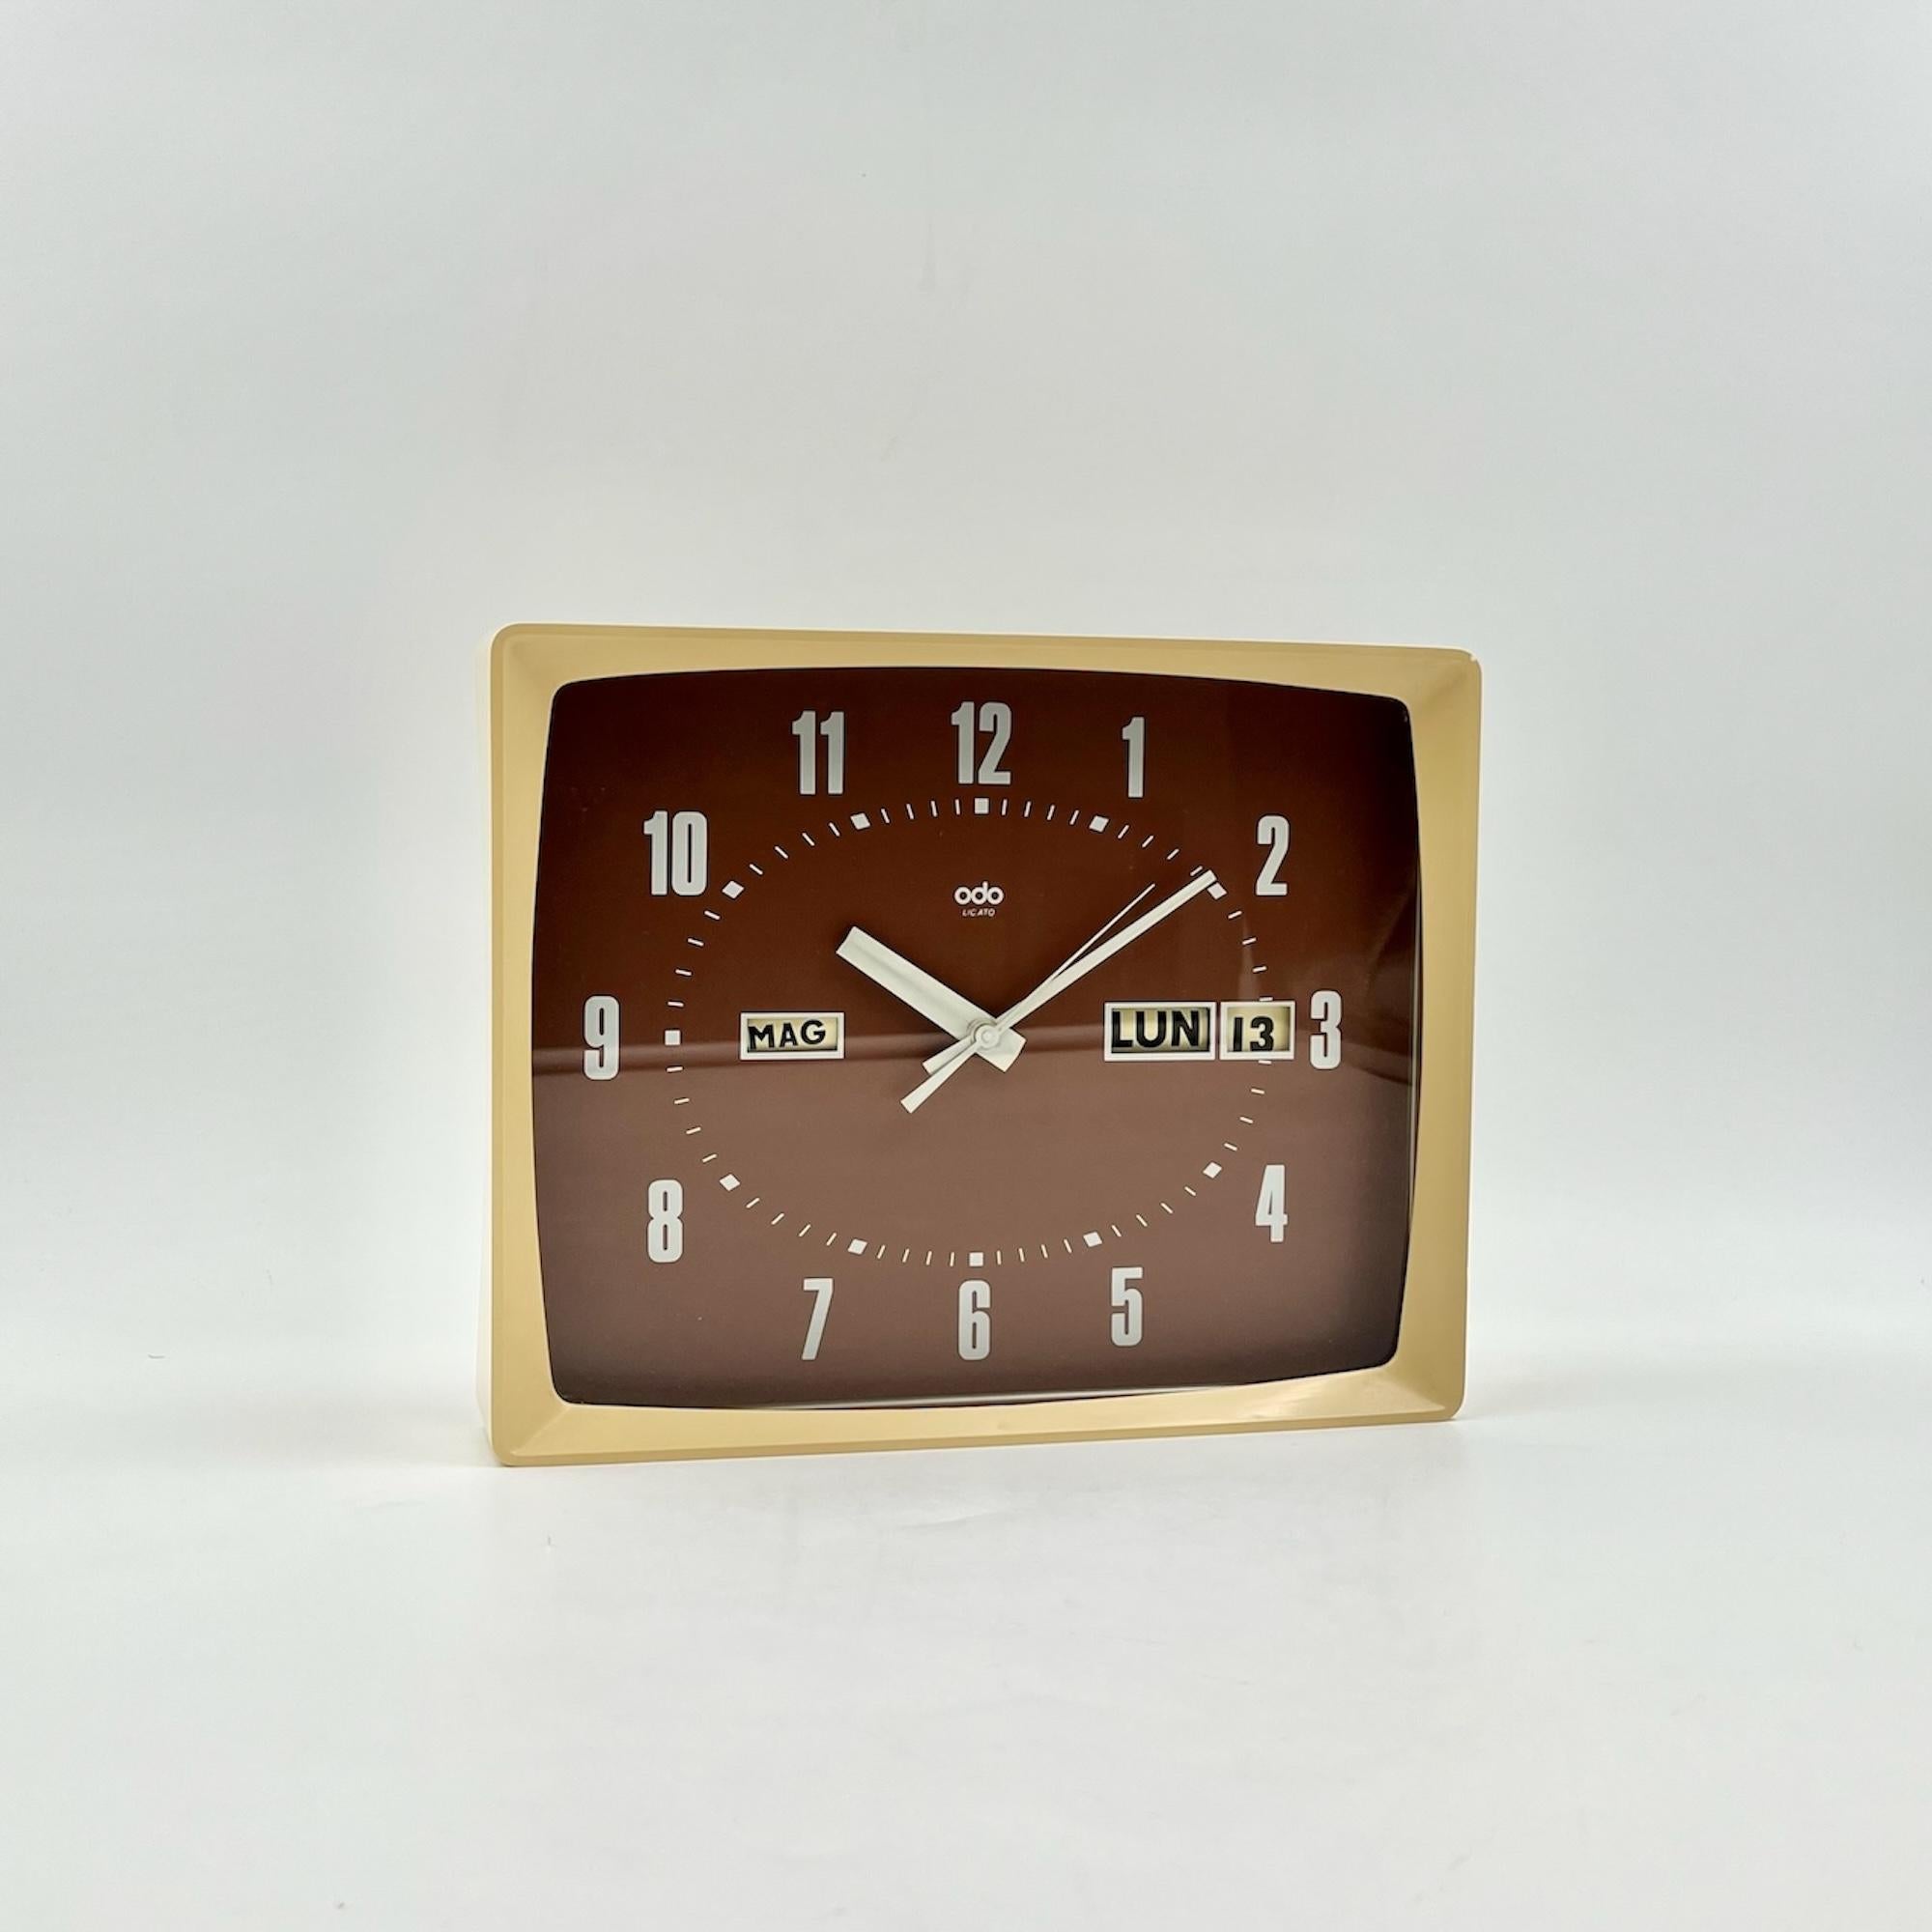 Step back in time in the realm of 70’s clocks with this amazing vintage wall clock featuring a flip calendar, produced by ODO Clock in France during the 1970s. Crafted with space age aesthetics in mind, this clock boasts a thick glossy cream plastic